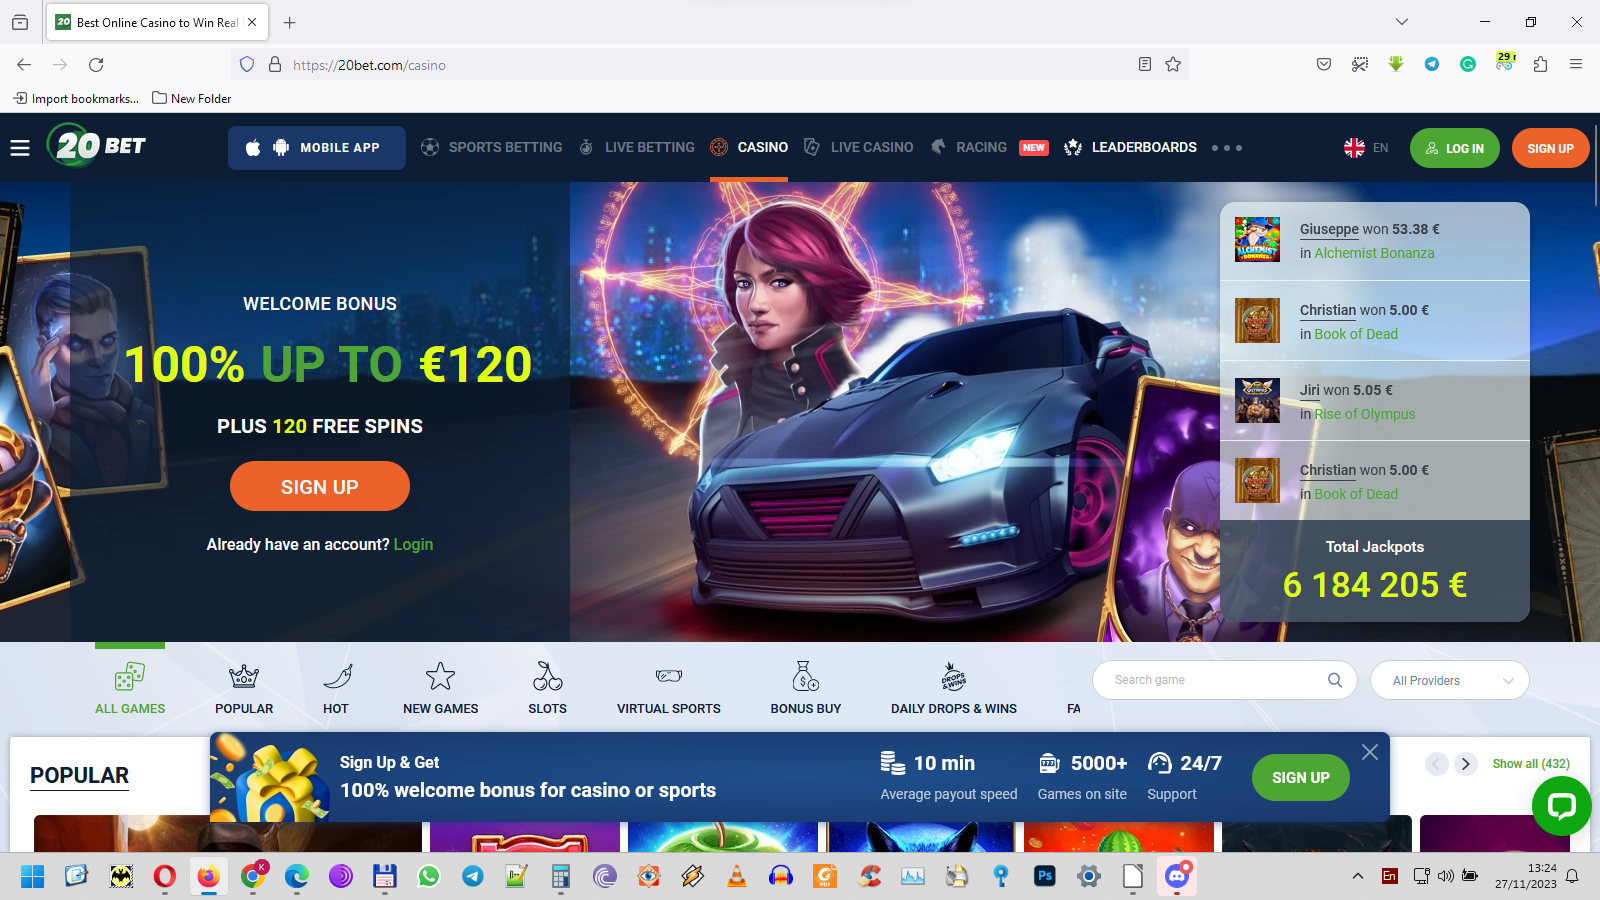 Design Layout at 20Bet Casino Review